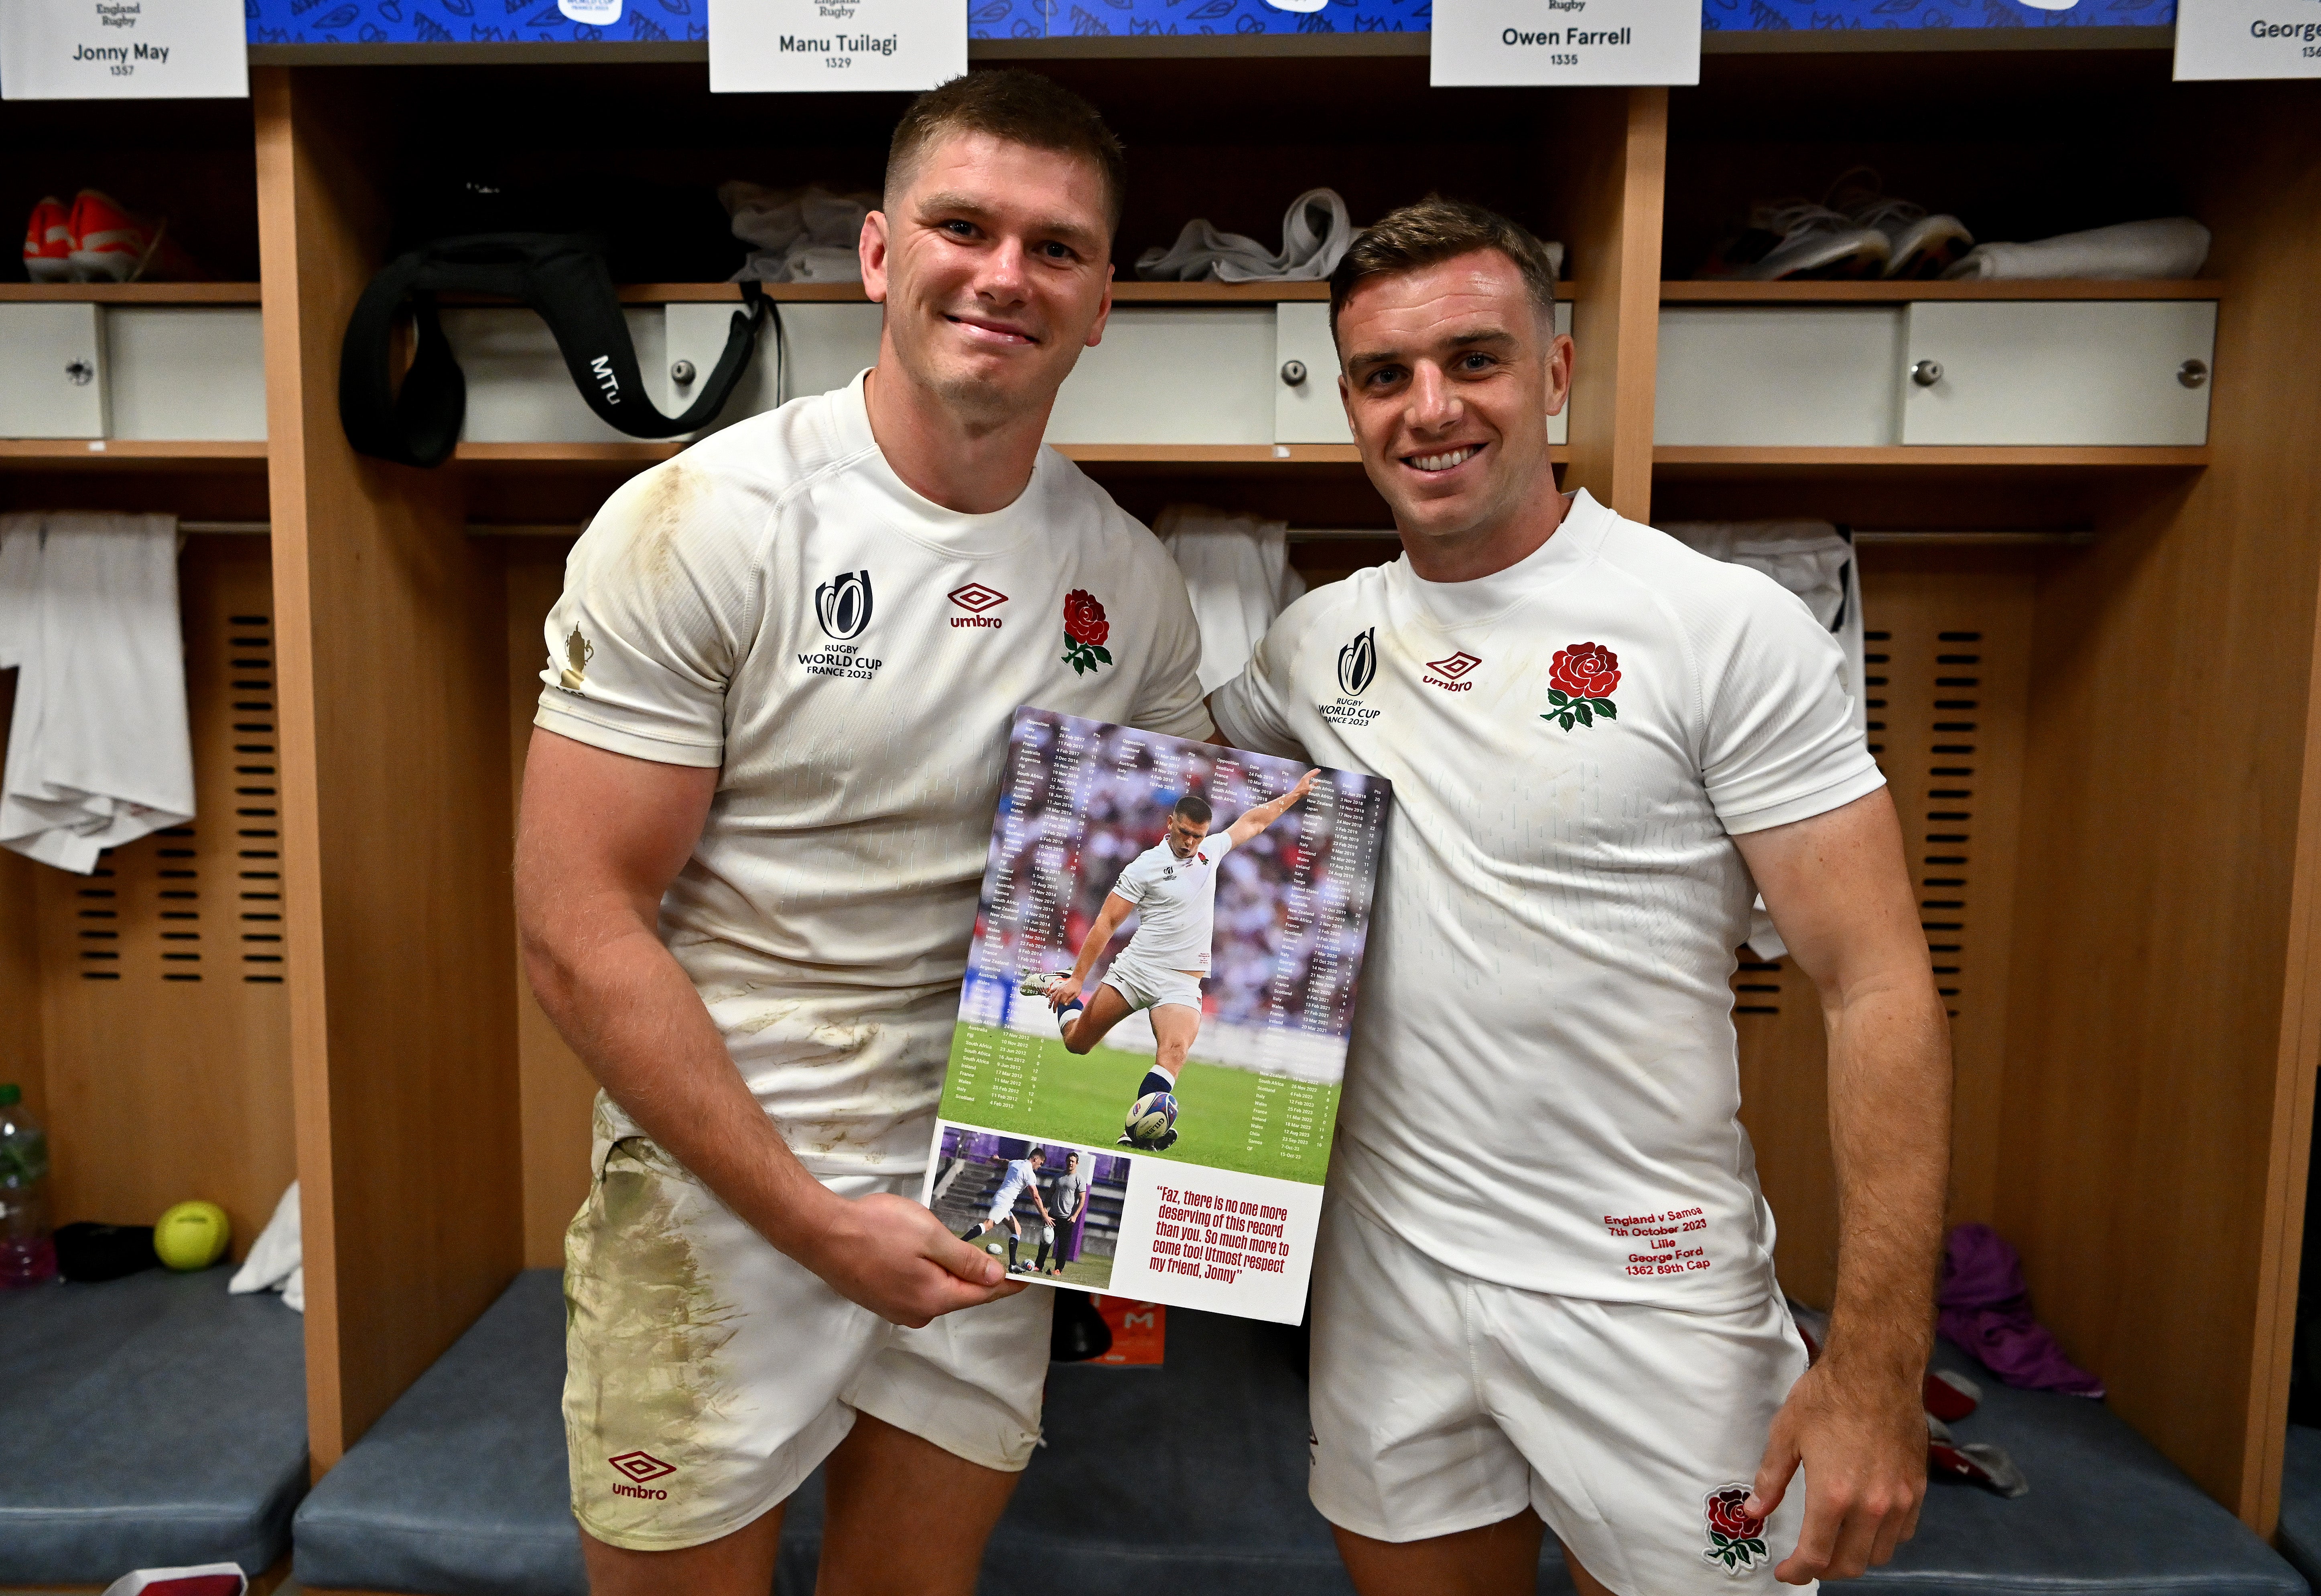 Owen Farrell (left) became England’s record points scorer during the win over Samoa